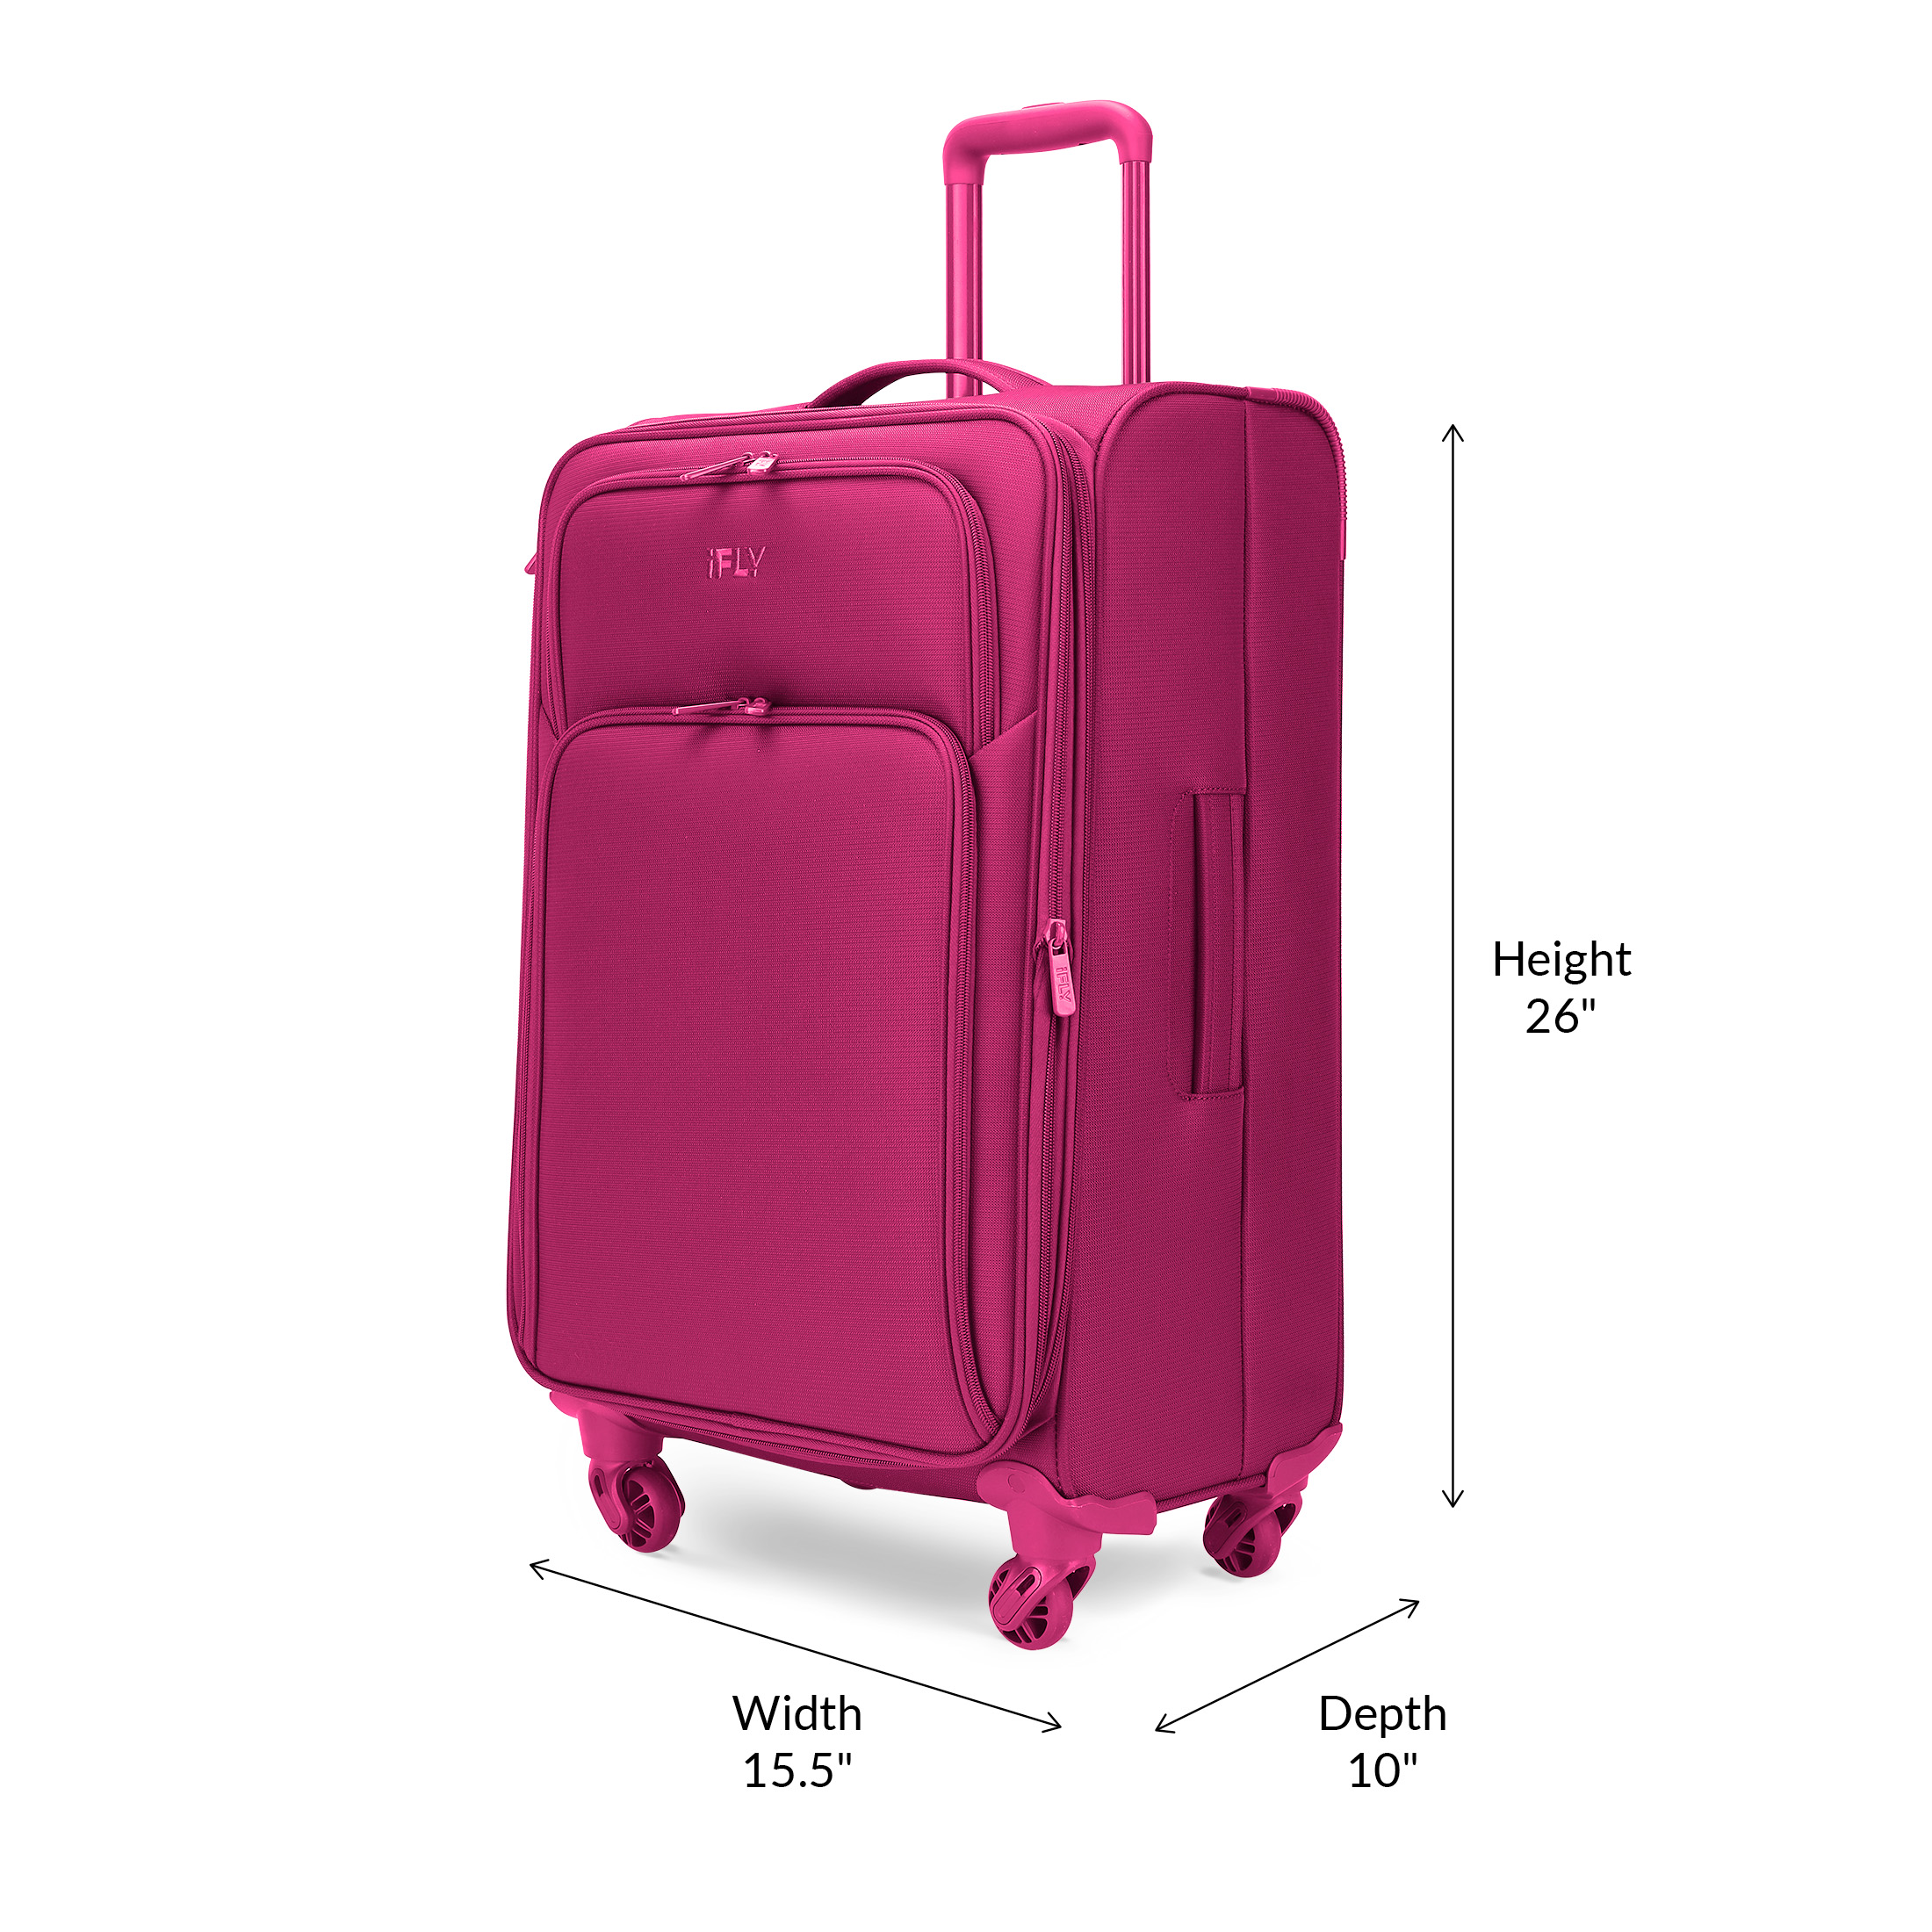 iFLY Softside Passion 24" Checked Luggage, Fuchsia - image 2 of 8